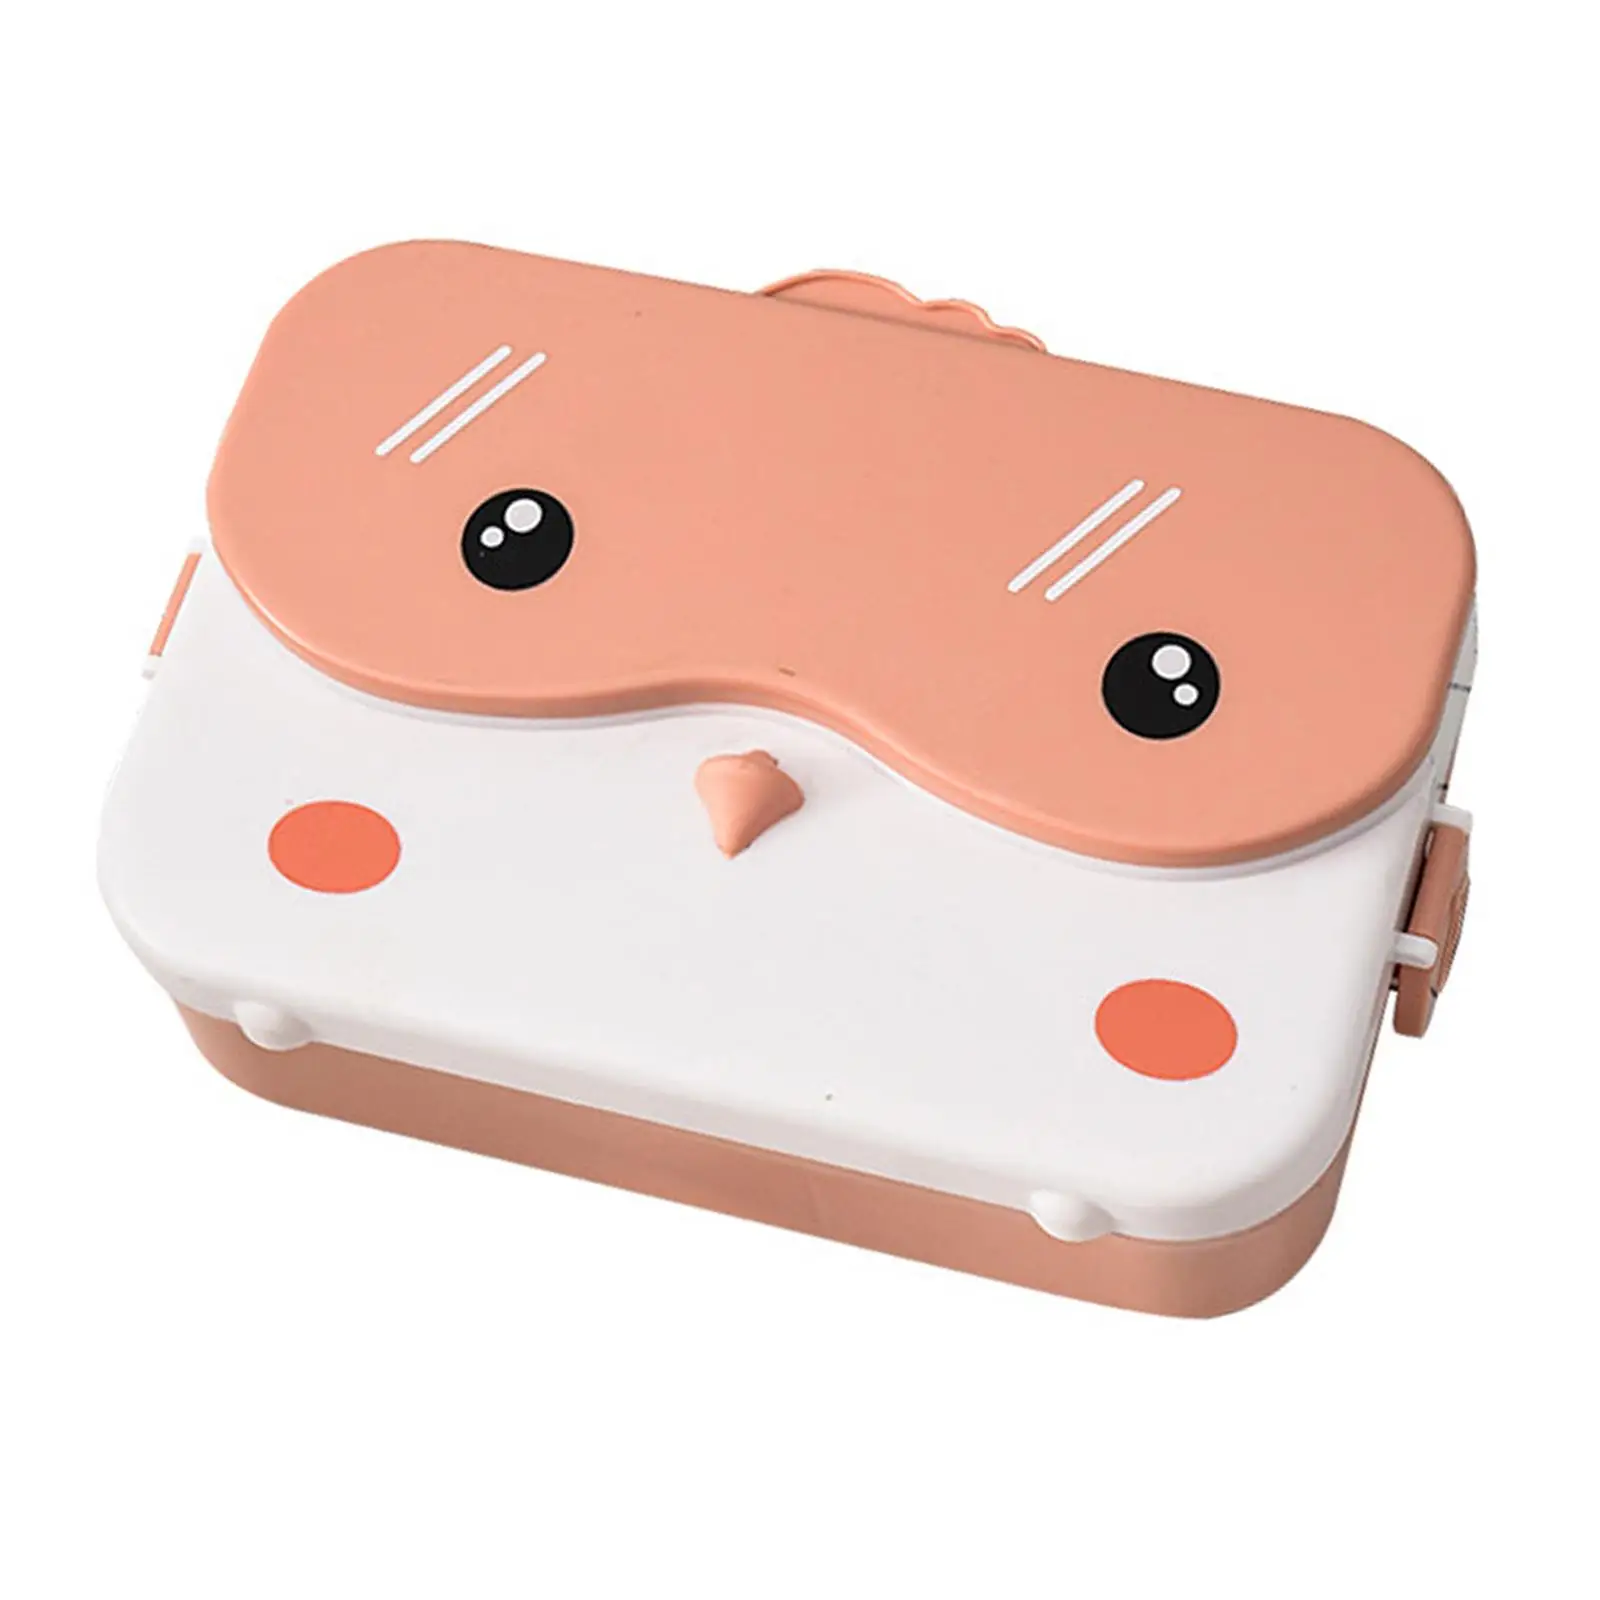 Cute Bento Lunchbox Food Container Rectangular Multifunction Leakproof for Office